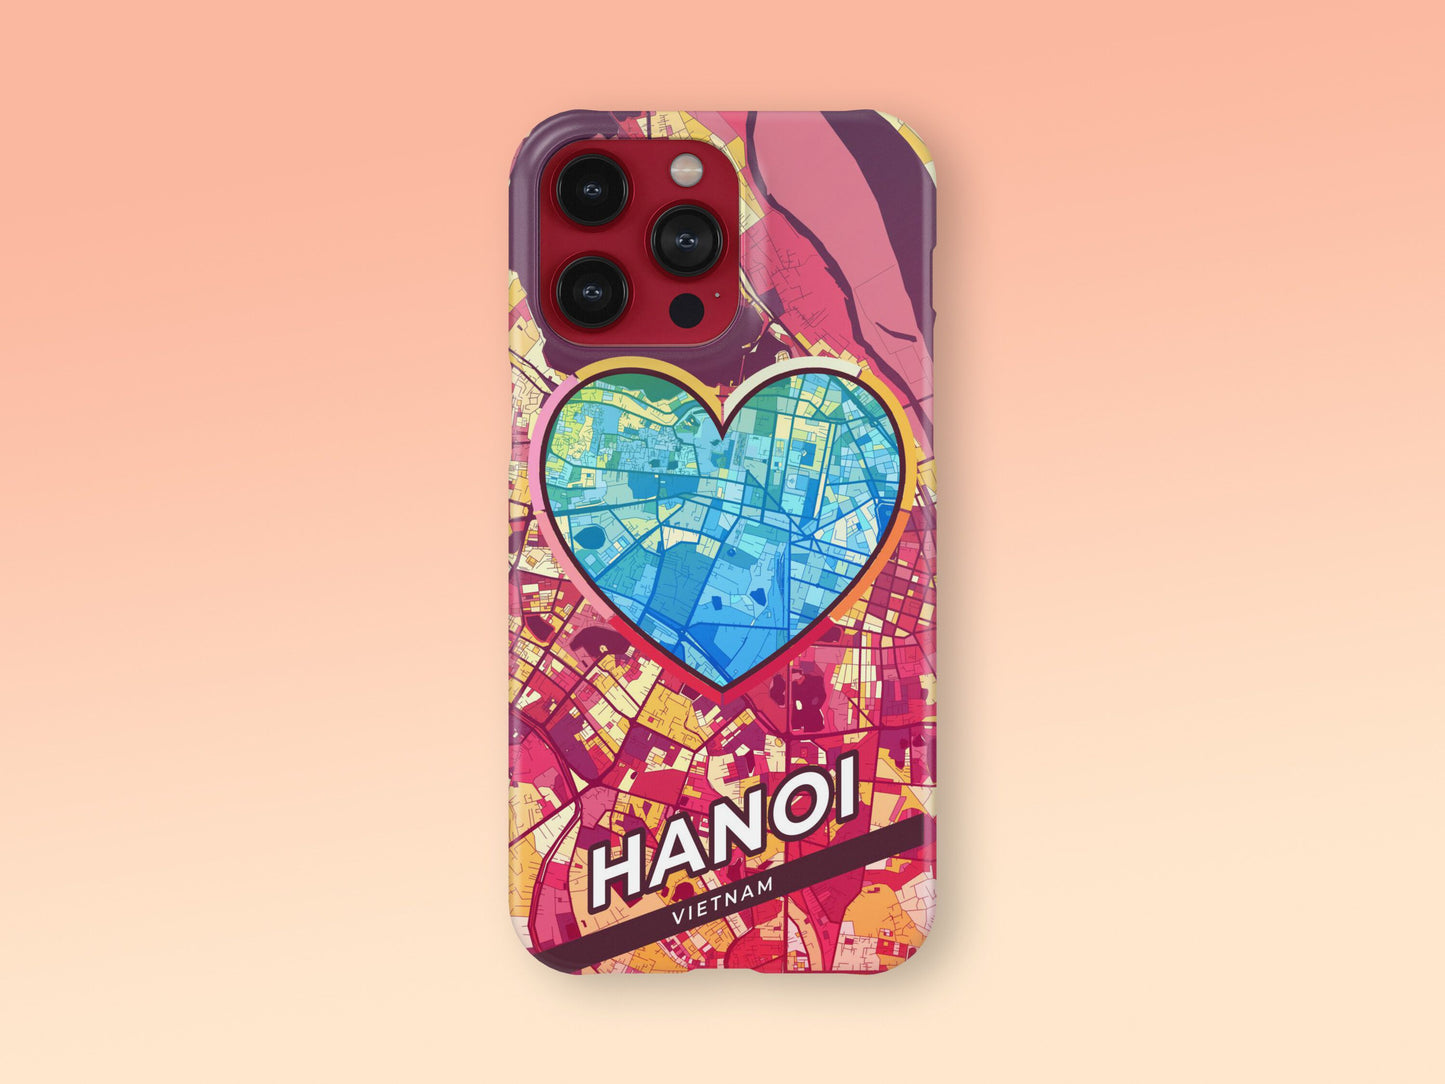 Hanoi Vietnam slim phone case with colorful icon. Birthday, wedding or housewarming gift. Couple match cases. 2